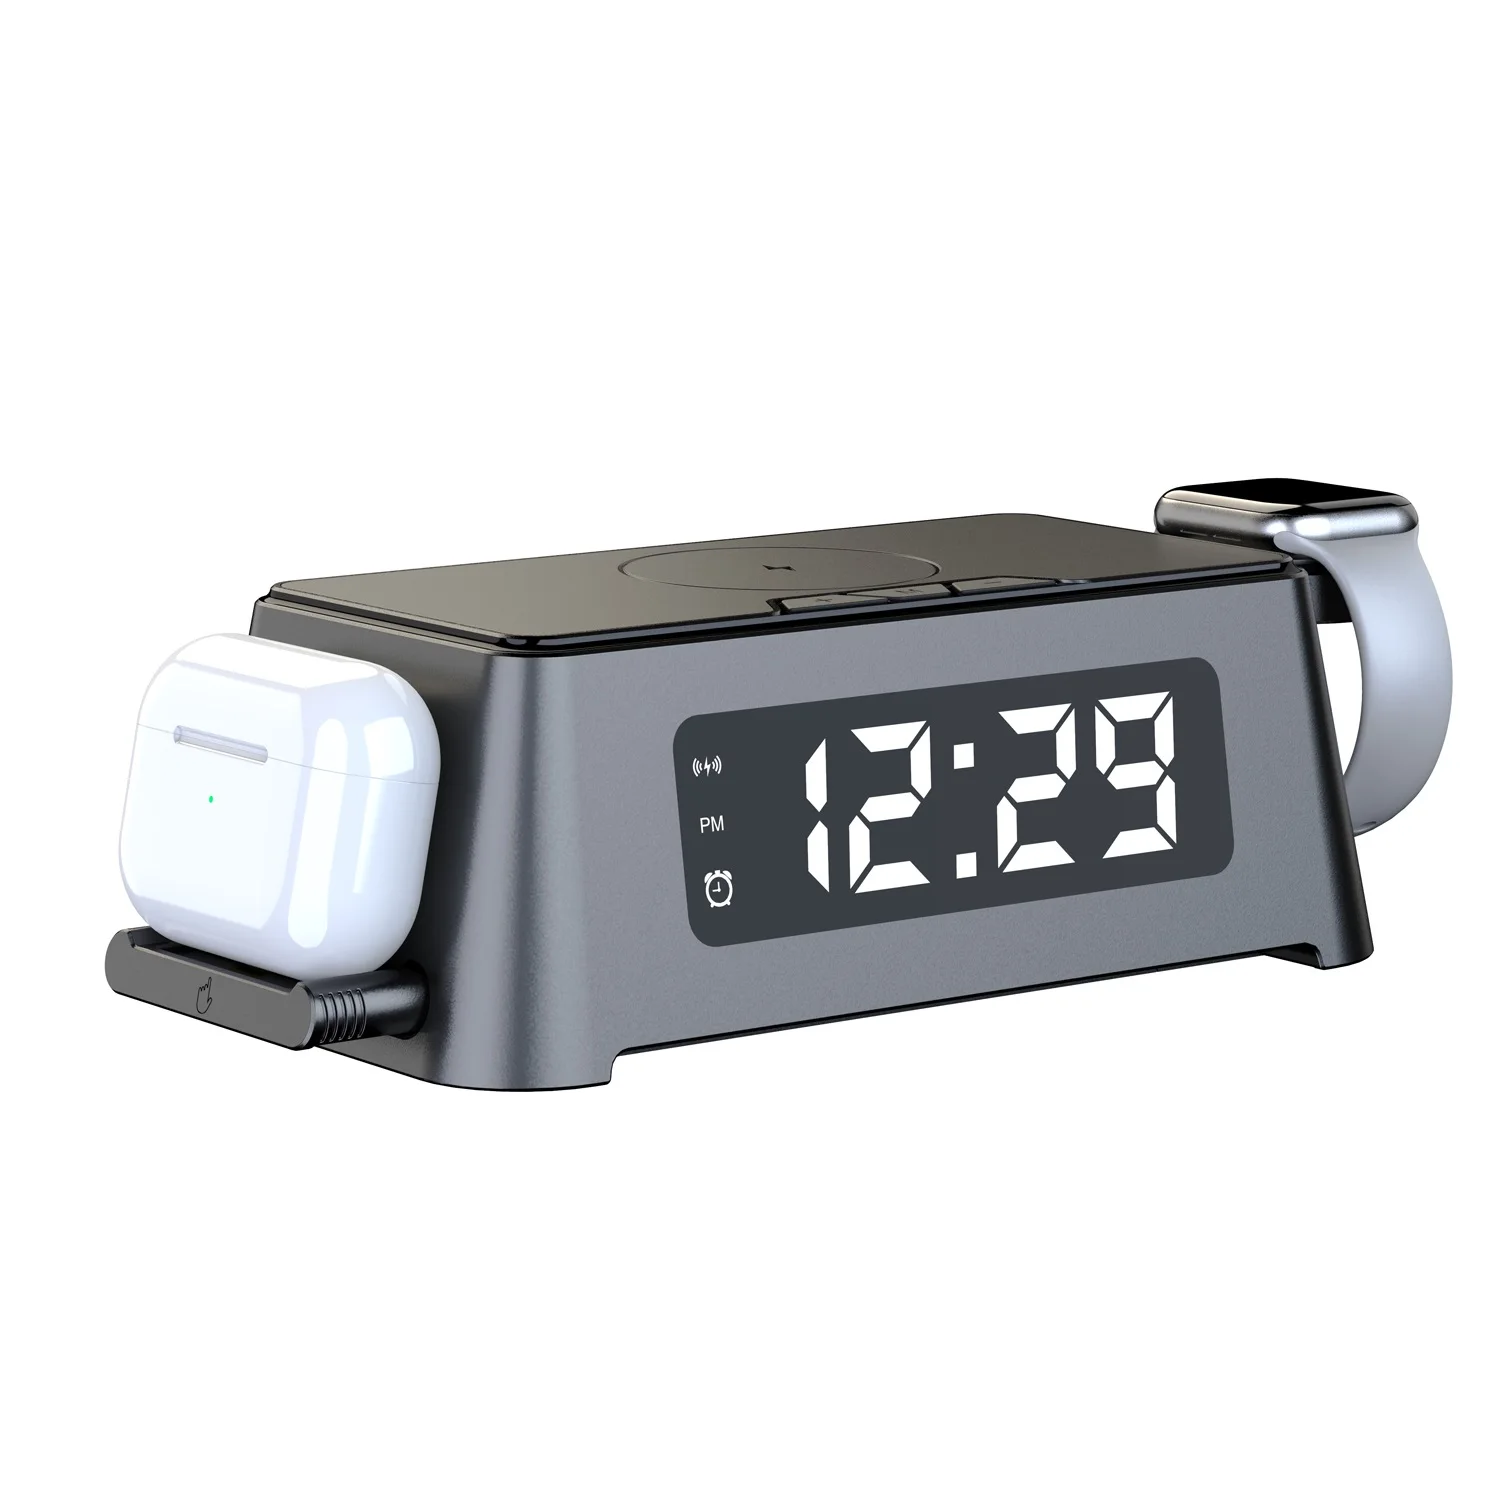 

New Trending 4 in 1 Fast QI Wireless Charging Alarm Clock Station for IPhone tws Earbuds And Magnetic Charger for Watch